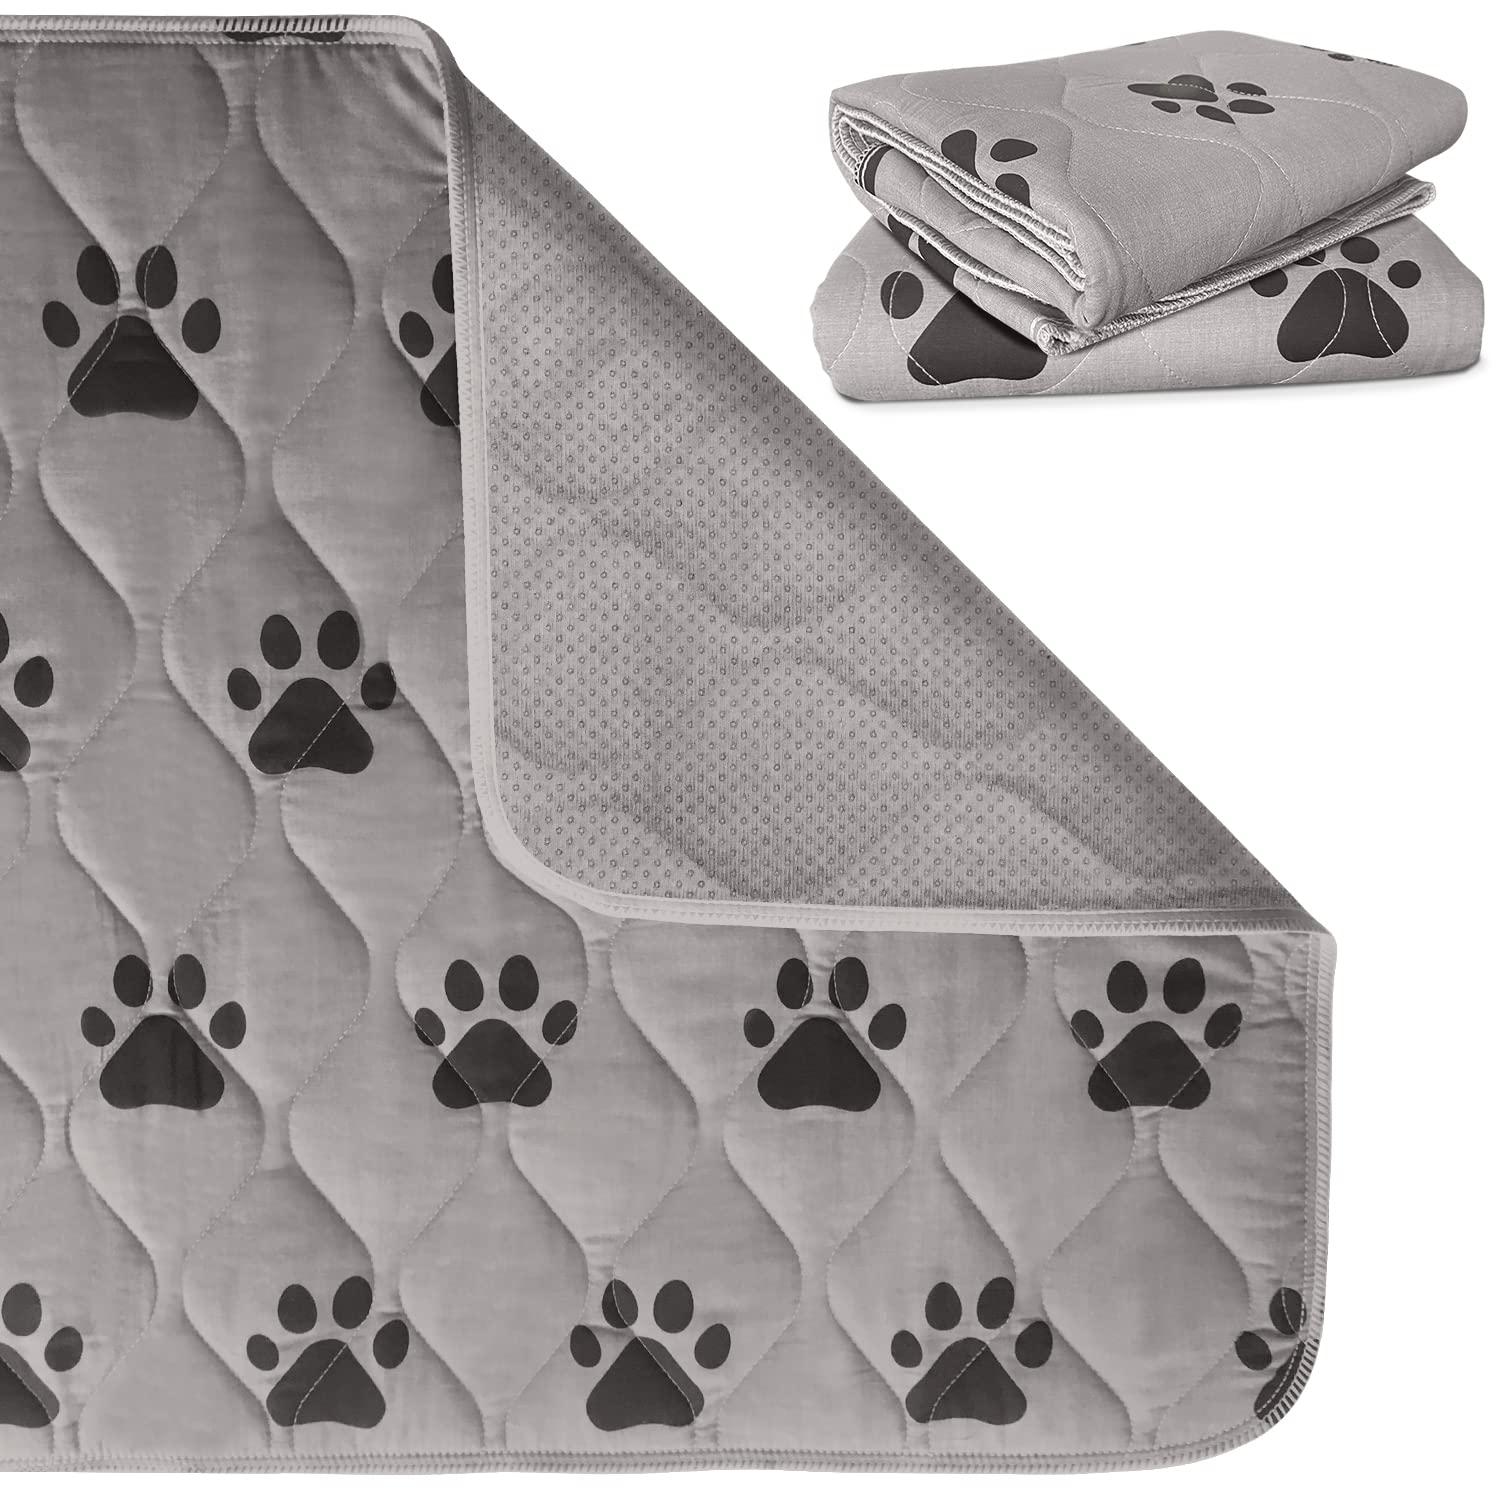 Gorilla Grip Reusable Puppy Pads, 2 Pack, 40x26, Slip Resistant Pet Crate Mat, Absorbs Urine, Waterproof, Cloth Pee Pad for Training Puppies, Washable Incontinence Underpads, Chucks, Protects Sofa